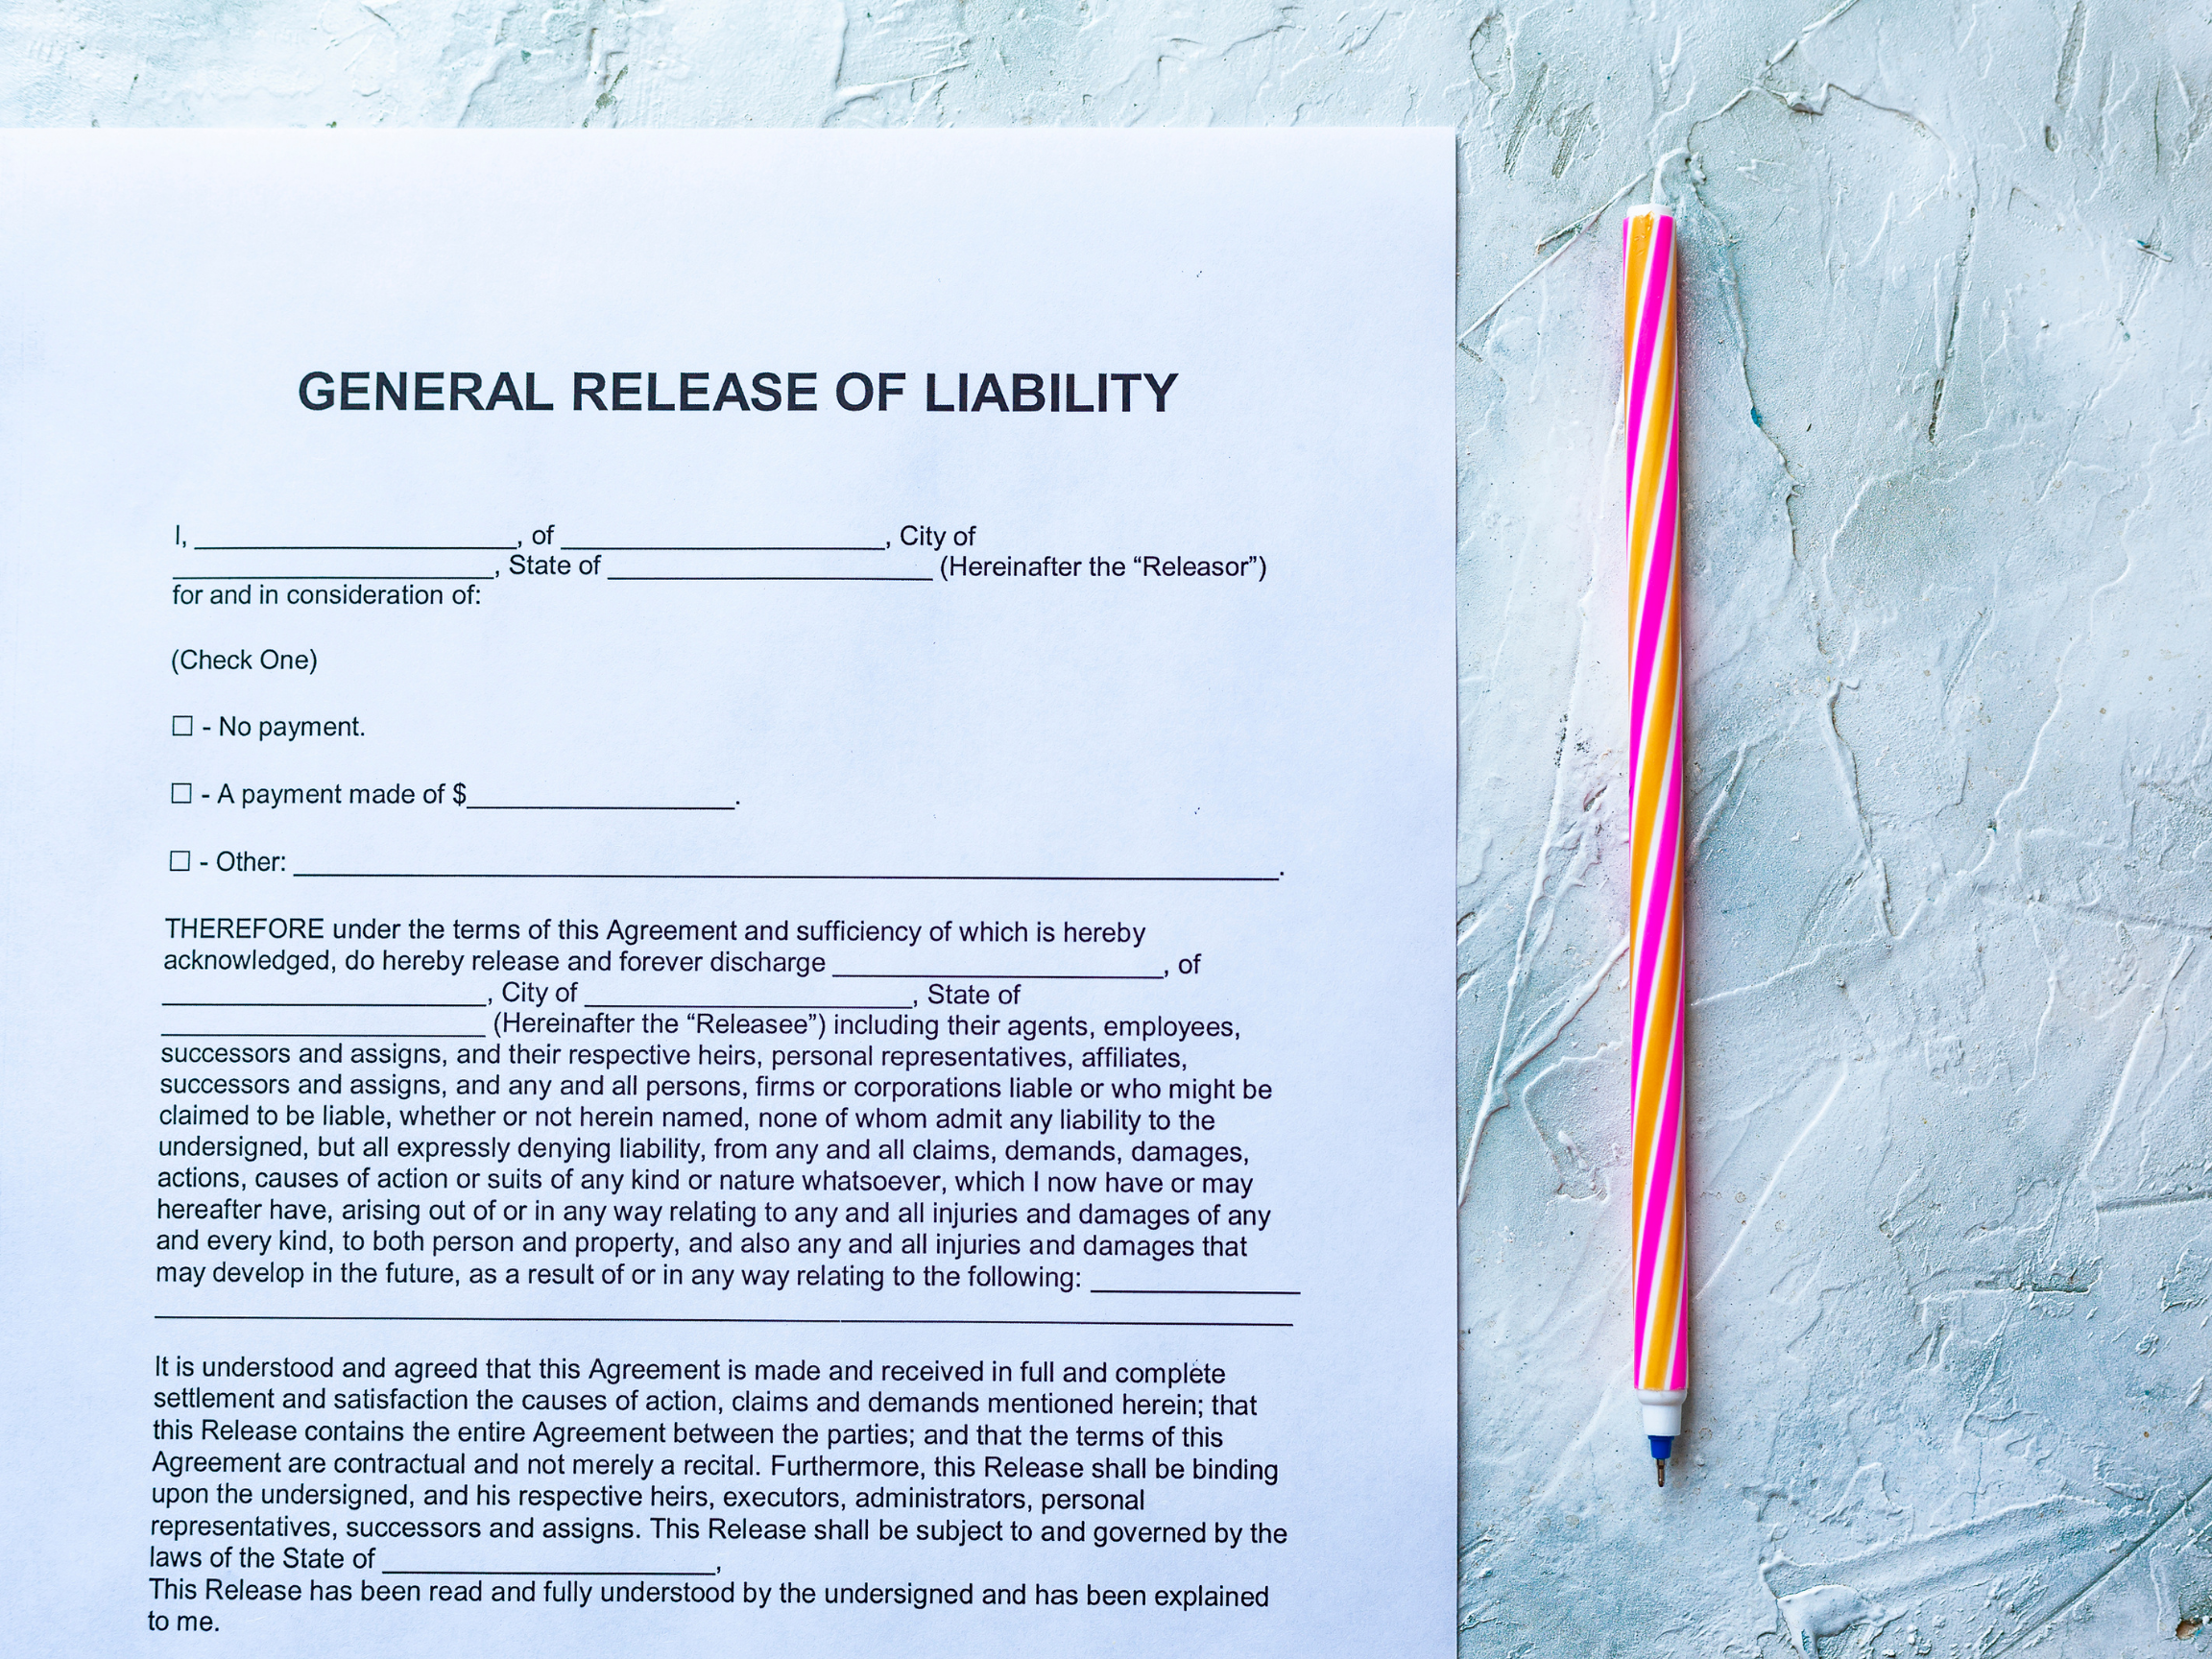 I Was Injured but I Signed a Liability Waiver. Can I Sue?